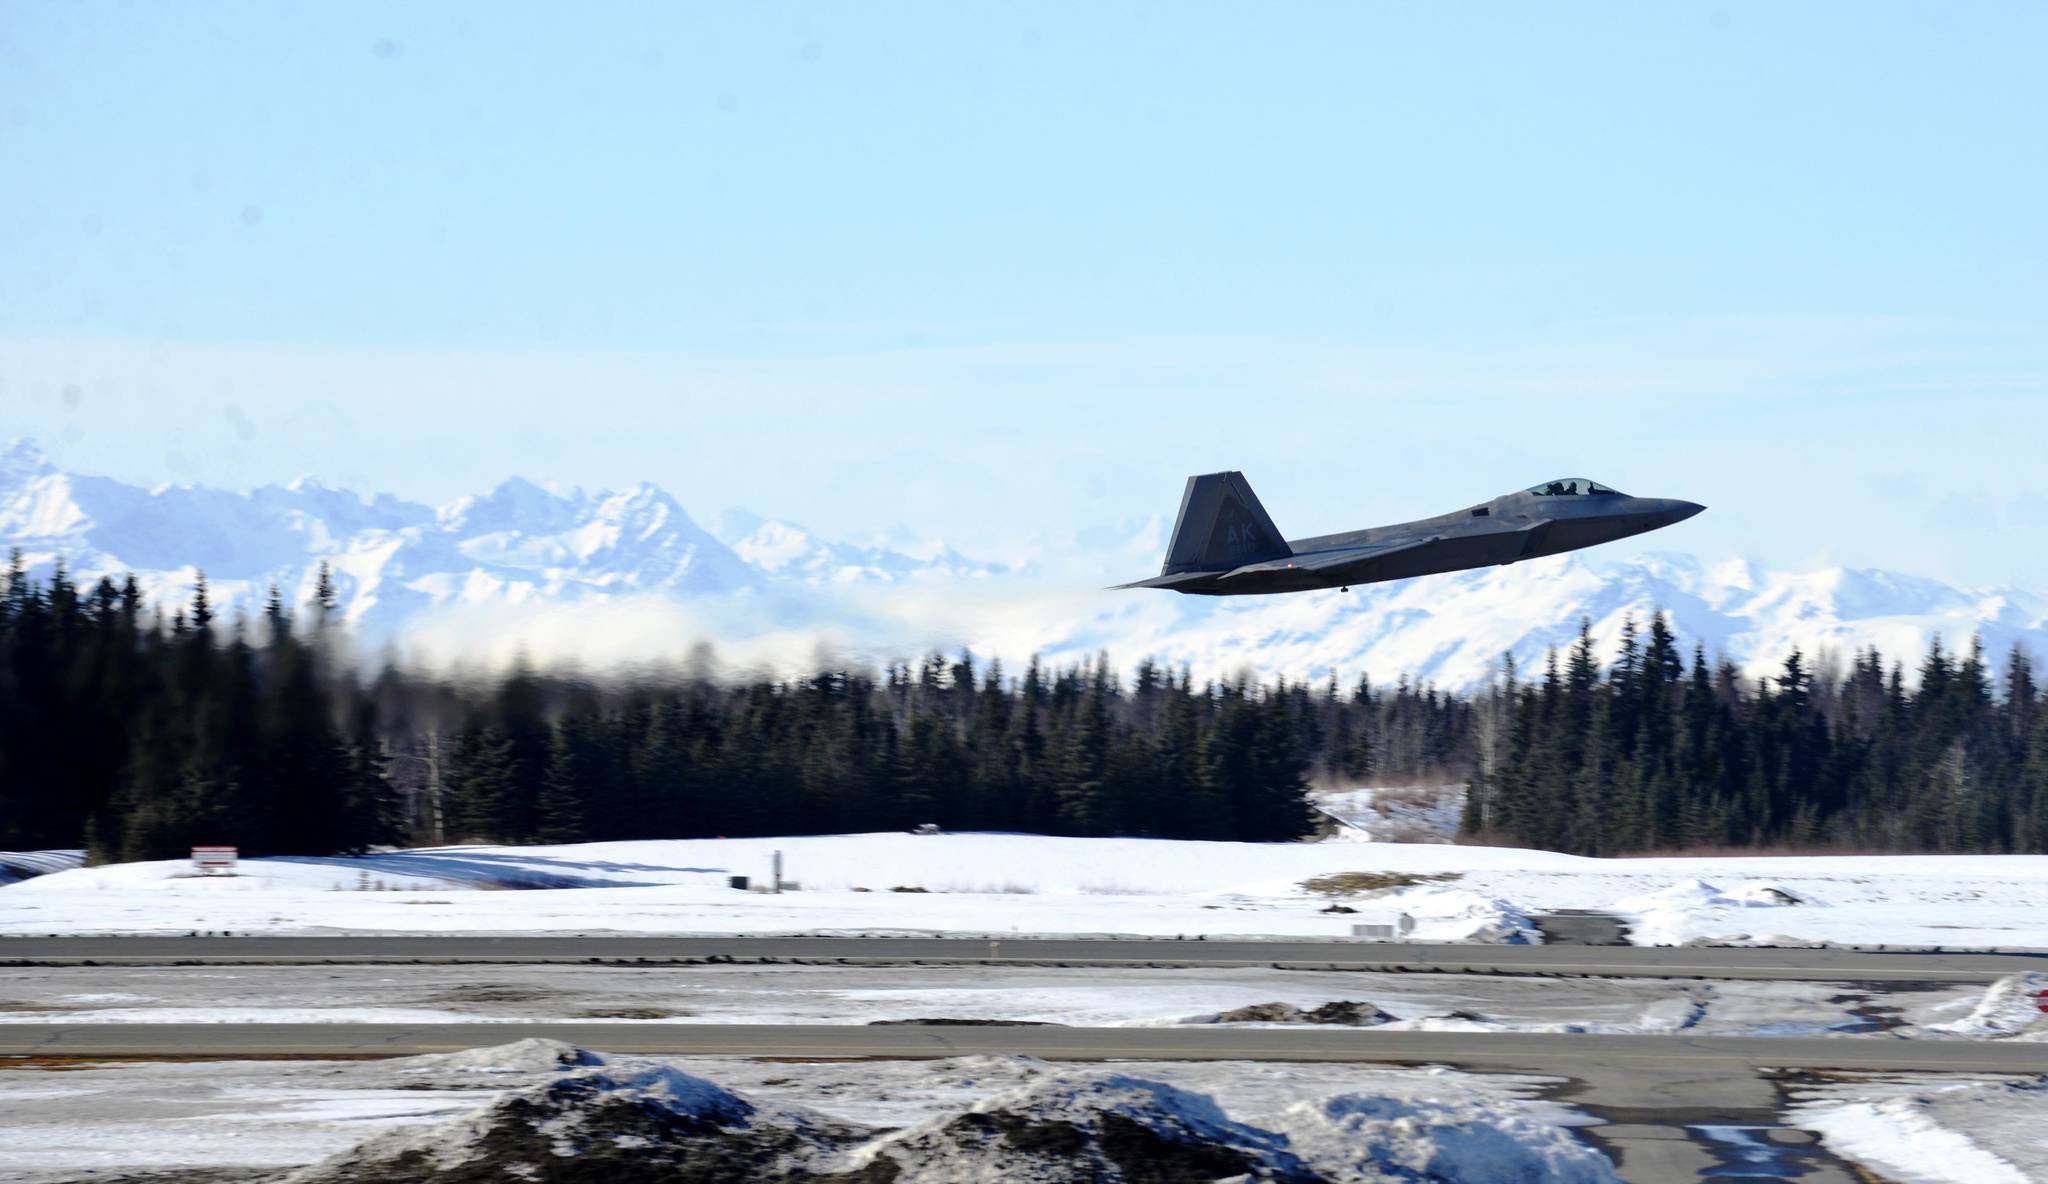 As a U.S. Air Force F-22 “Raptor” fighter jet takes off from the Kenai Municipal Airport, others await fueling on Monday, March 19, 2018 in Kenai. Eight of the fighters landed at the Kenai airport Monday after weather conditions kept them from Joint Base Elmendorf-Richardson in Anchorage, their home field. Four of the F-22s belong to the 90th Fighter Squadron and four to the 525th Fighter Squadron, which were on separate training flights before landing in Kenai, said Major Stephen Montgomery, a pilot with the 90th. The fighters took off for Anchorage Monday afternoon. F-22s from Elmendorf have been occasionally using Kenai as an alternate landing site since October 2016, when a pair of the fighters landed there to assess the possibility. (Photo by Ben Boettger/Peninsula Clarion)